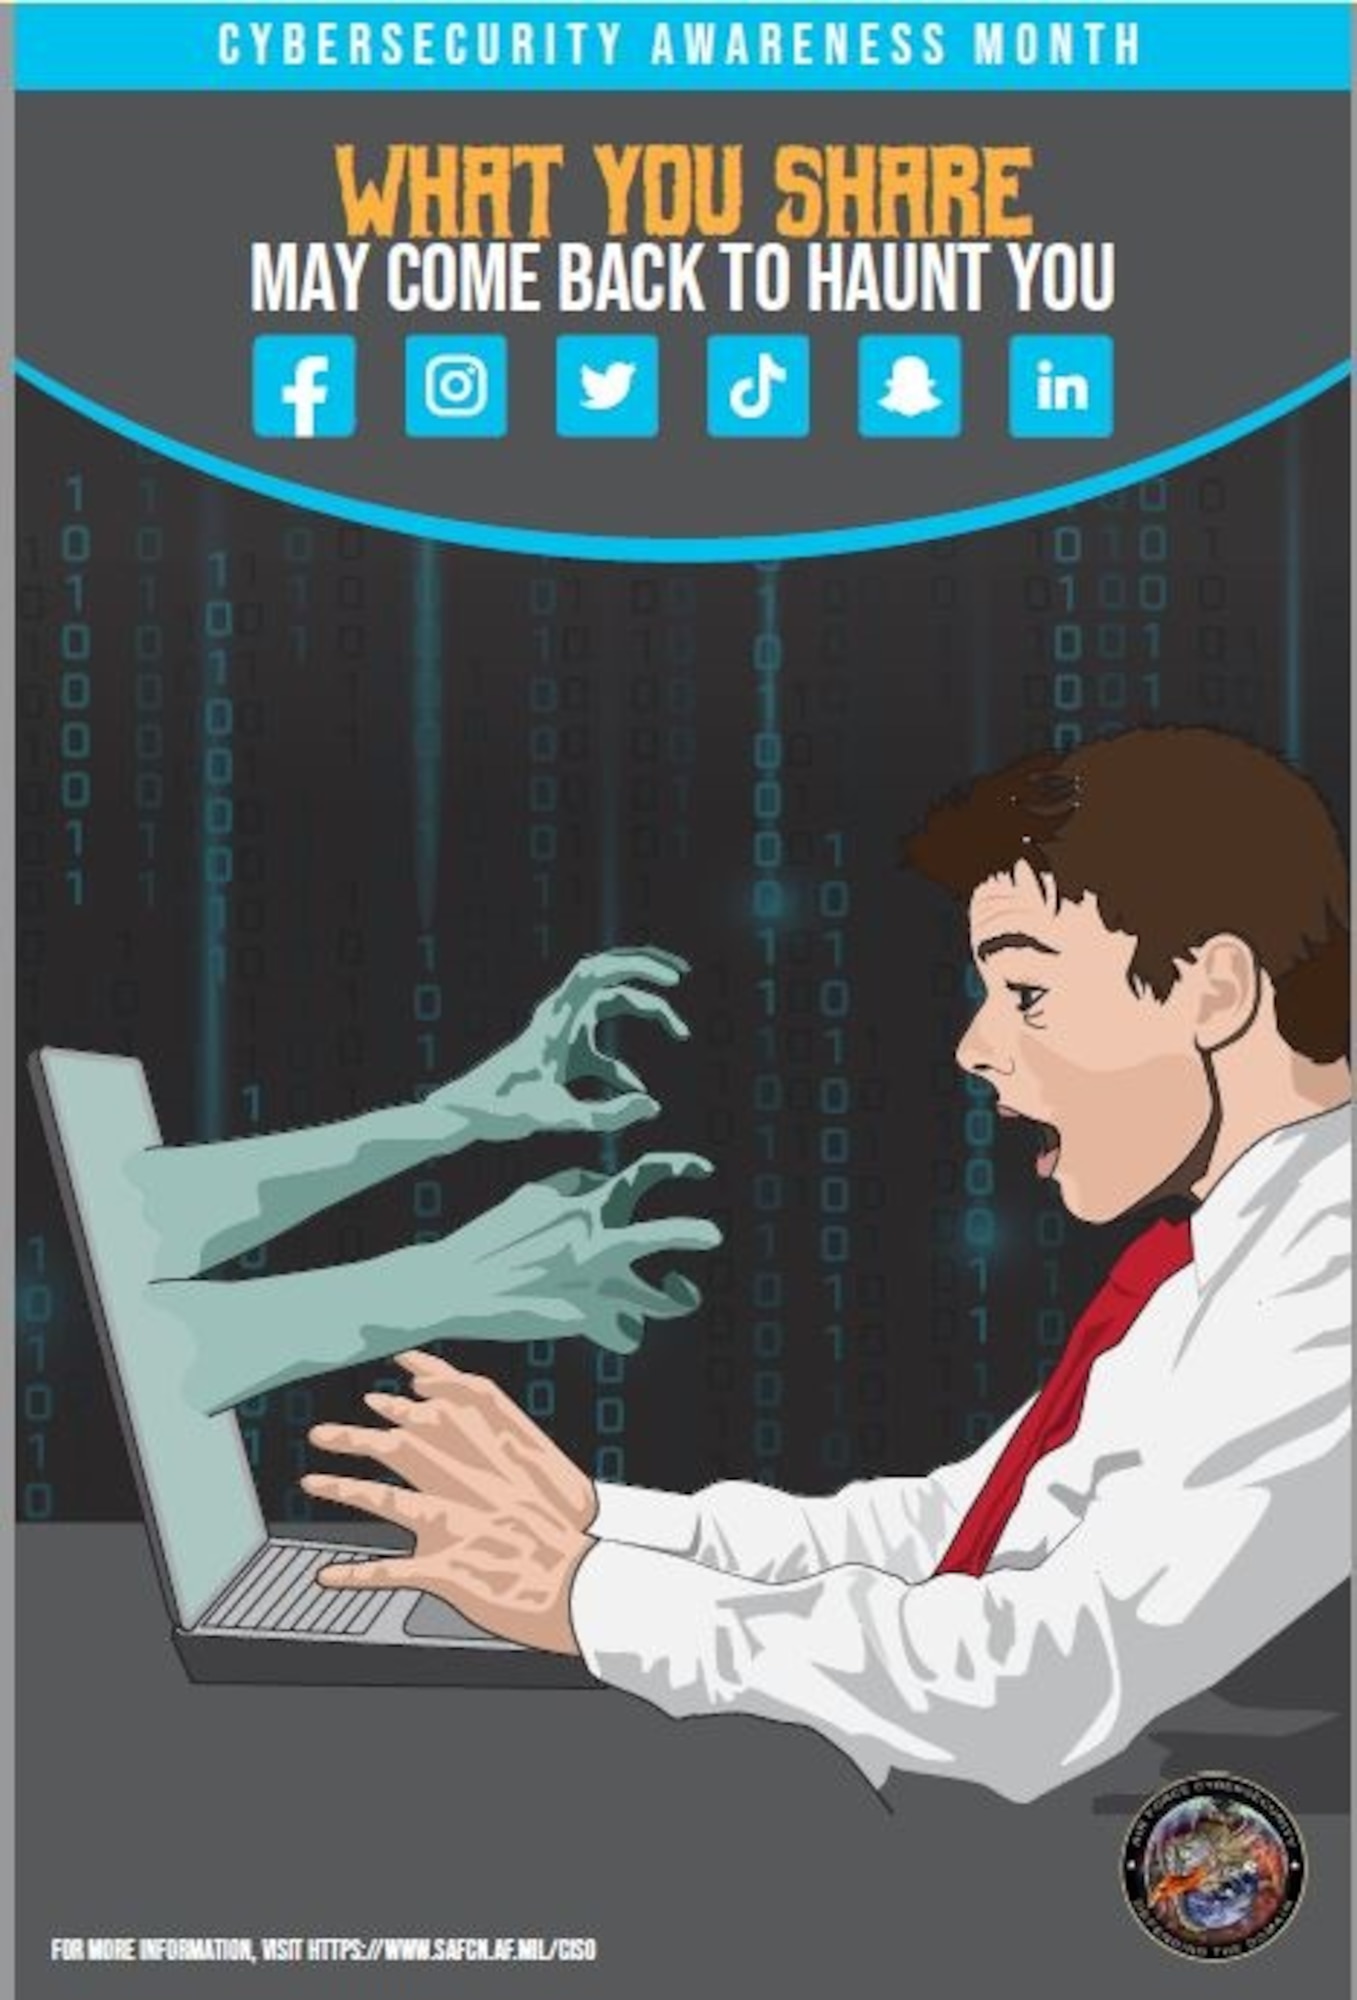 Cybersecurity Awareness Month 2021 is here. Week one is about how to safely use social media—don't let Internet zombies take over your social media presence! (U.S. Air Force graphic)